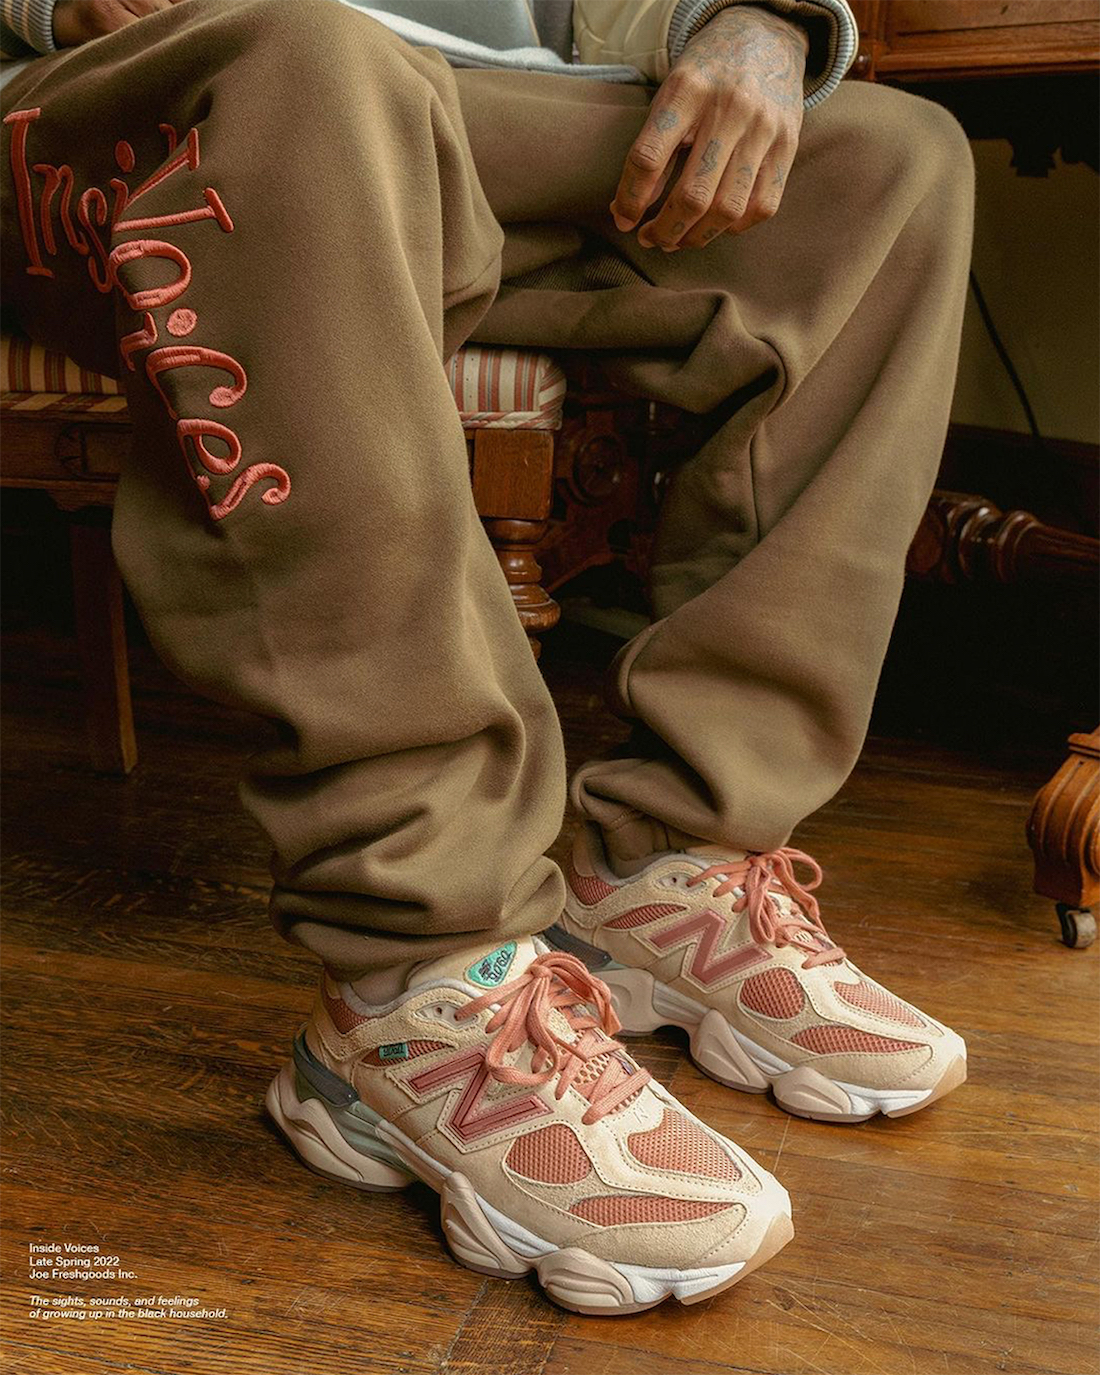 Joe Freshgoods New Balance Inside Voices Spring 2022 Release Date